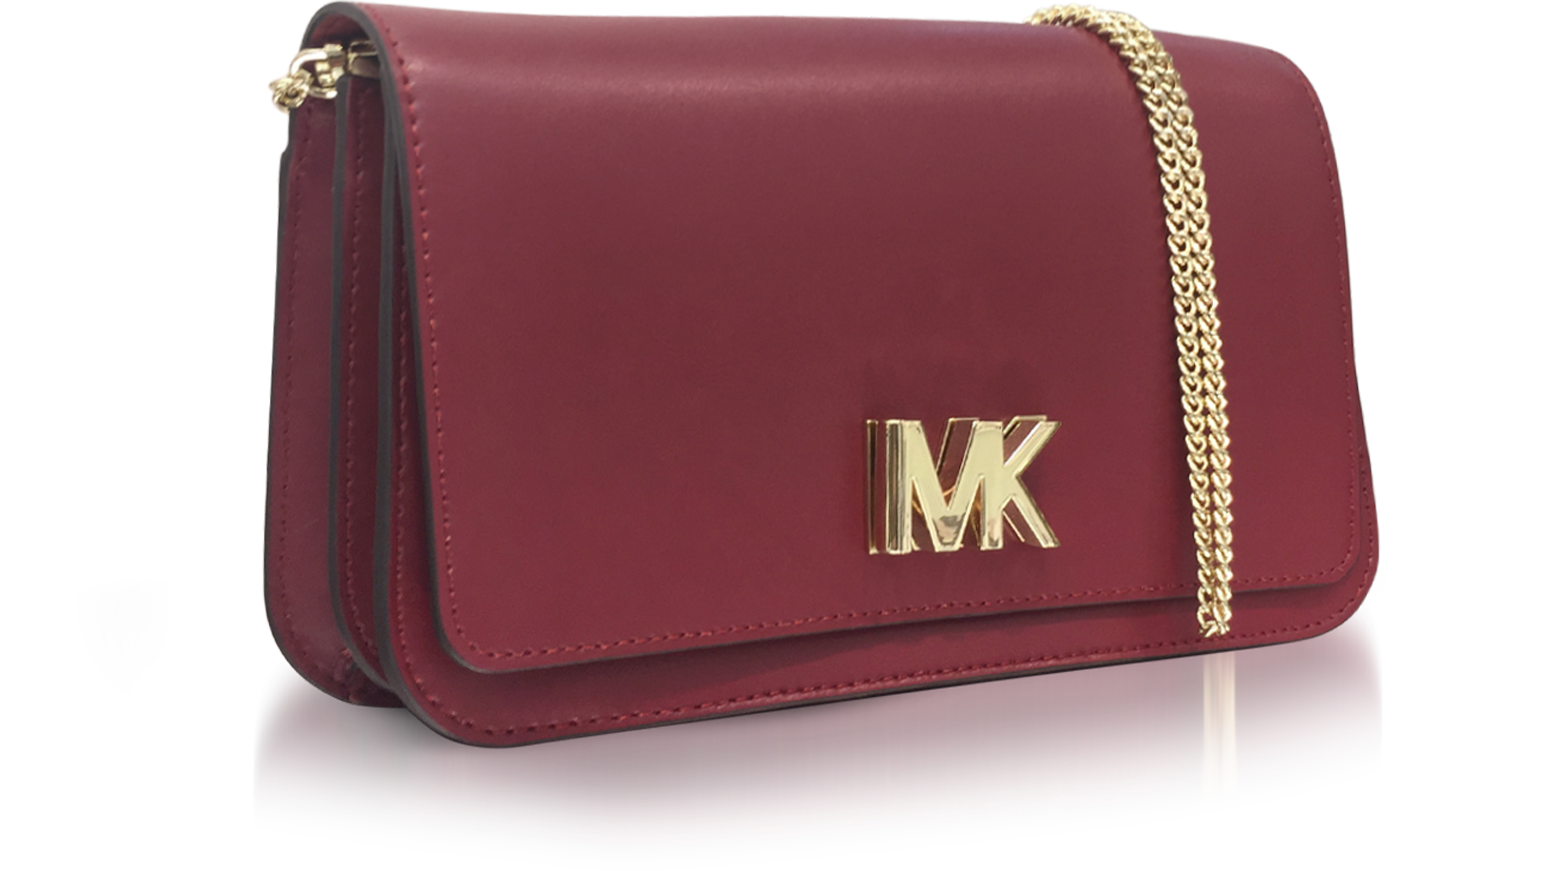 Michael Kors Mott Large Mulberry Leather Clutch at FORZIERI